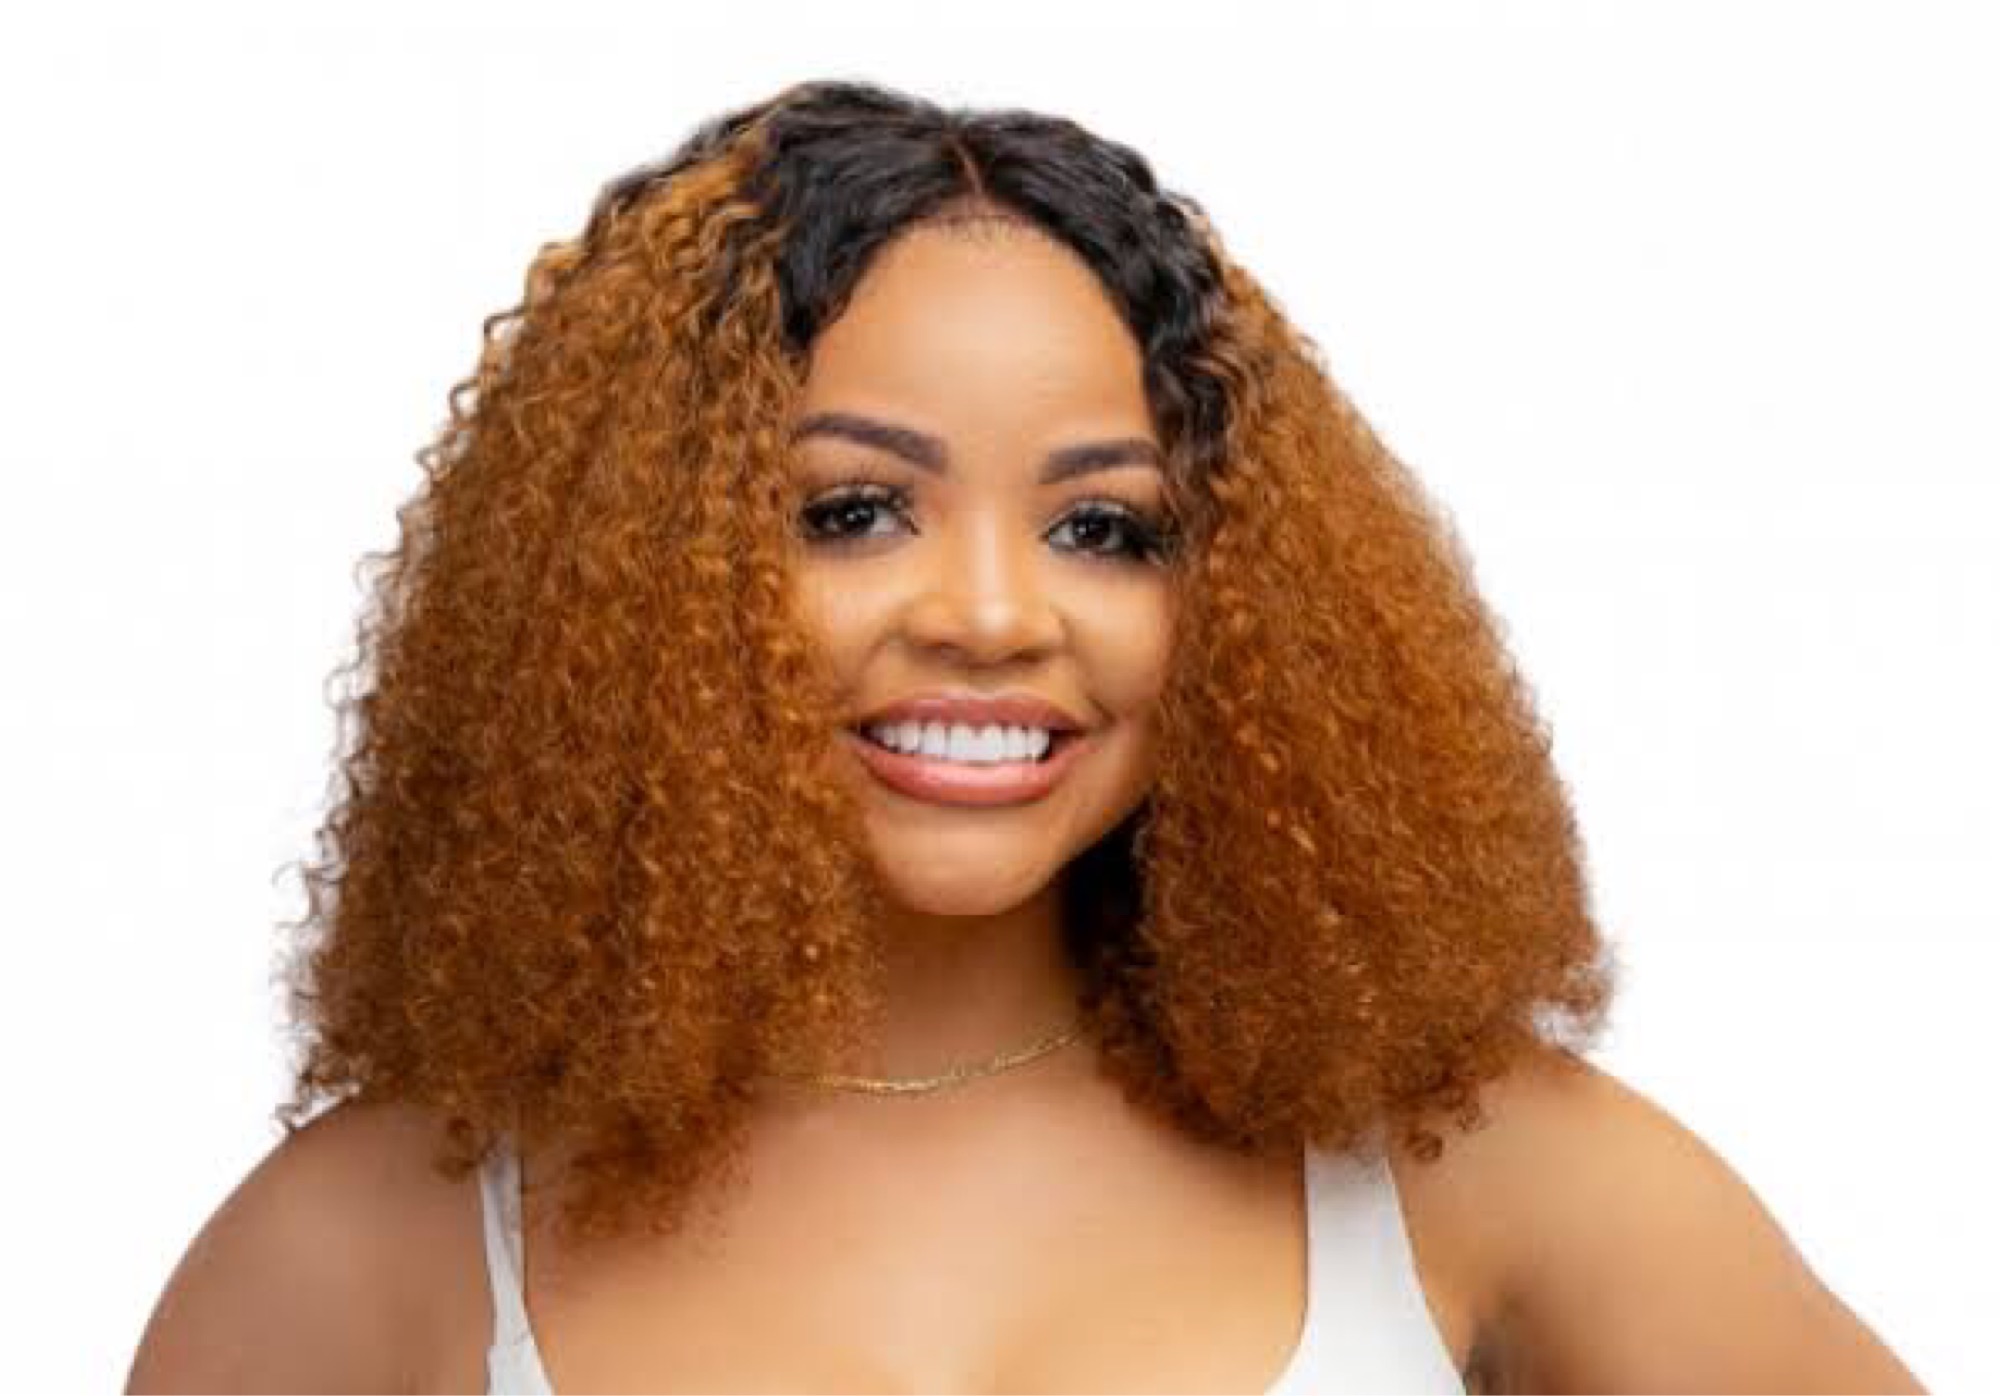 ‘If You Hate On Another Person’s Success, You Can’t Be Successful’ - BBNaija’s Nengi